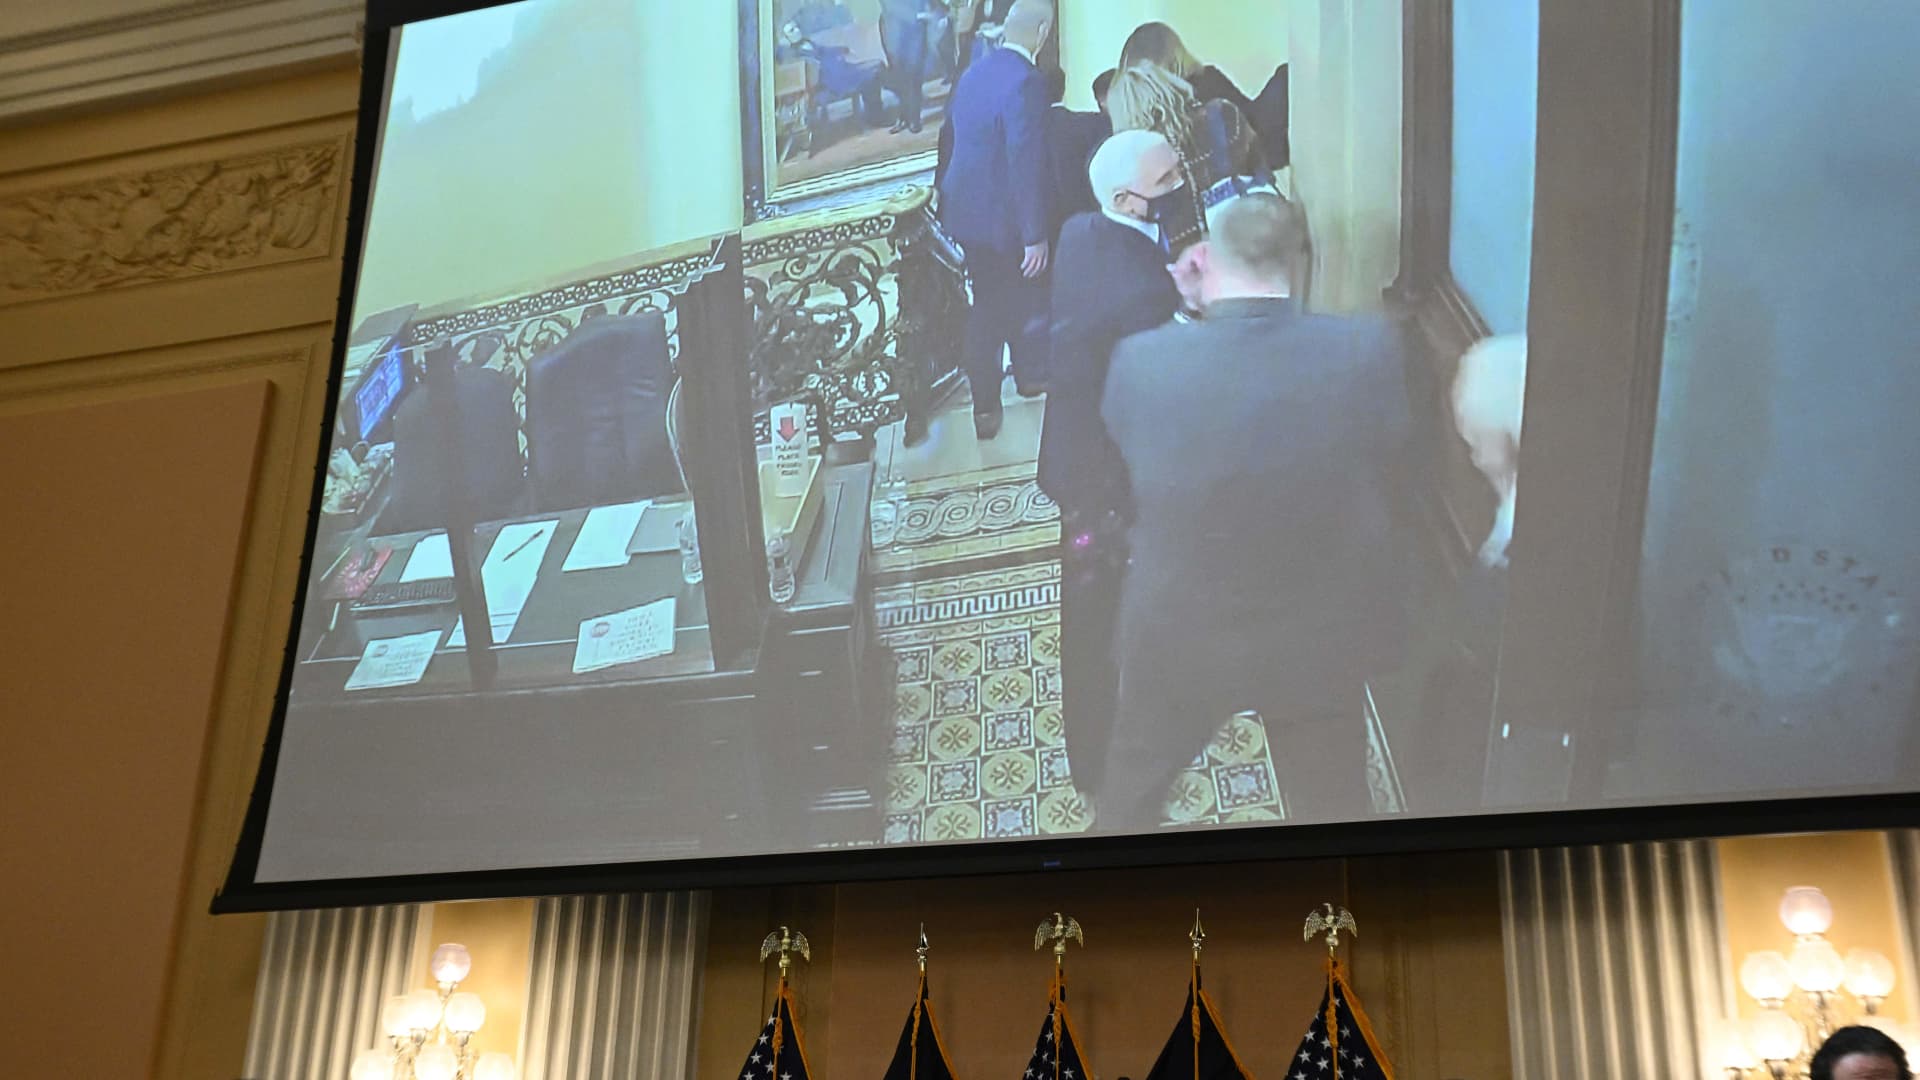 Images on a screen show former US Vice President Mike Pence being evacuated on January 6, 2021 from the US Capitol during a hearing of the US House Select Committee to Investigate the January 6 Attack on the US Capitol, on Capitol Hill in Washington, DC, on June 16, 2022.